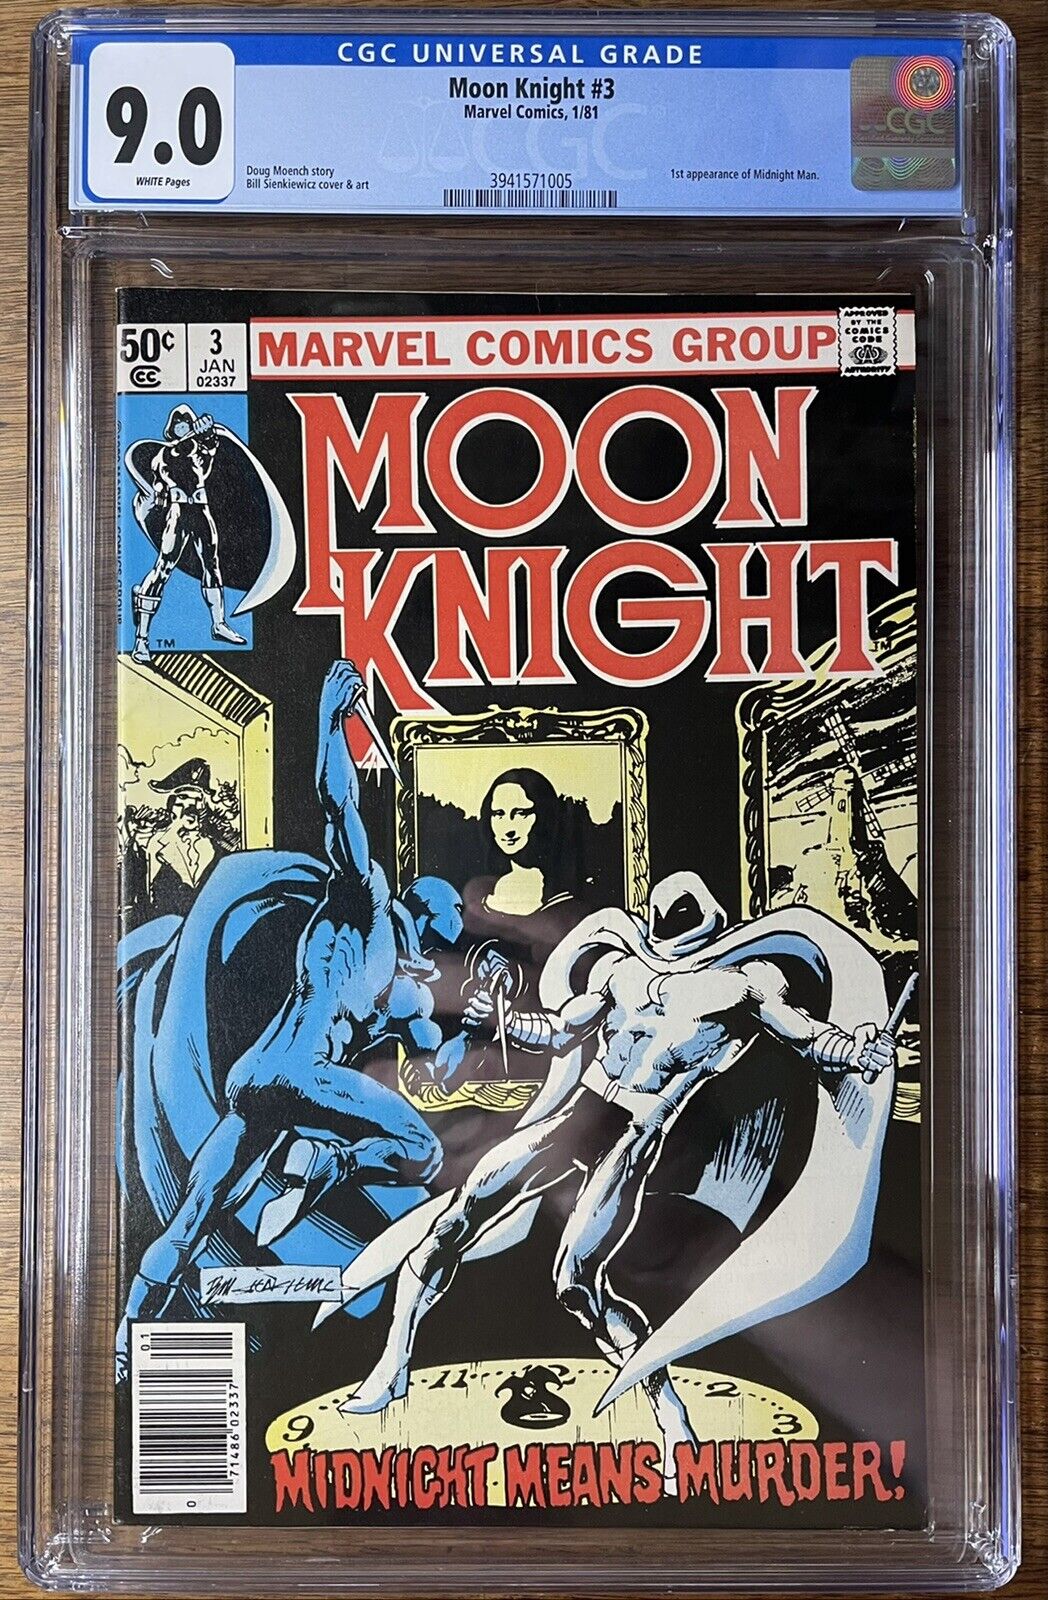 MOON KNIGHT #3 CGC 9.0 - White Pages NEWSSTAND EDITION 1st App. of MIDNIGHT MAN